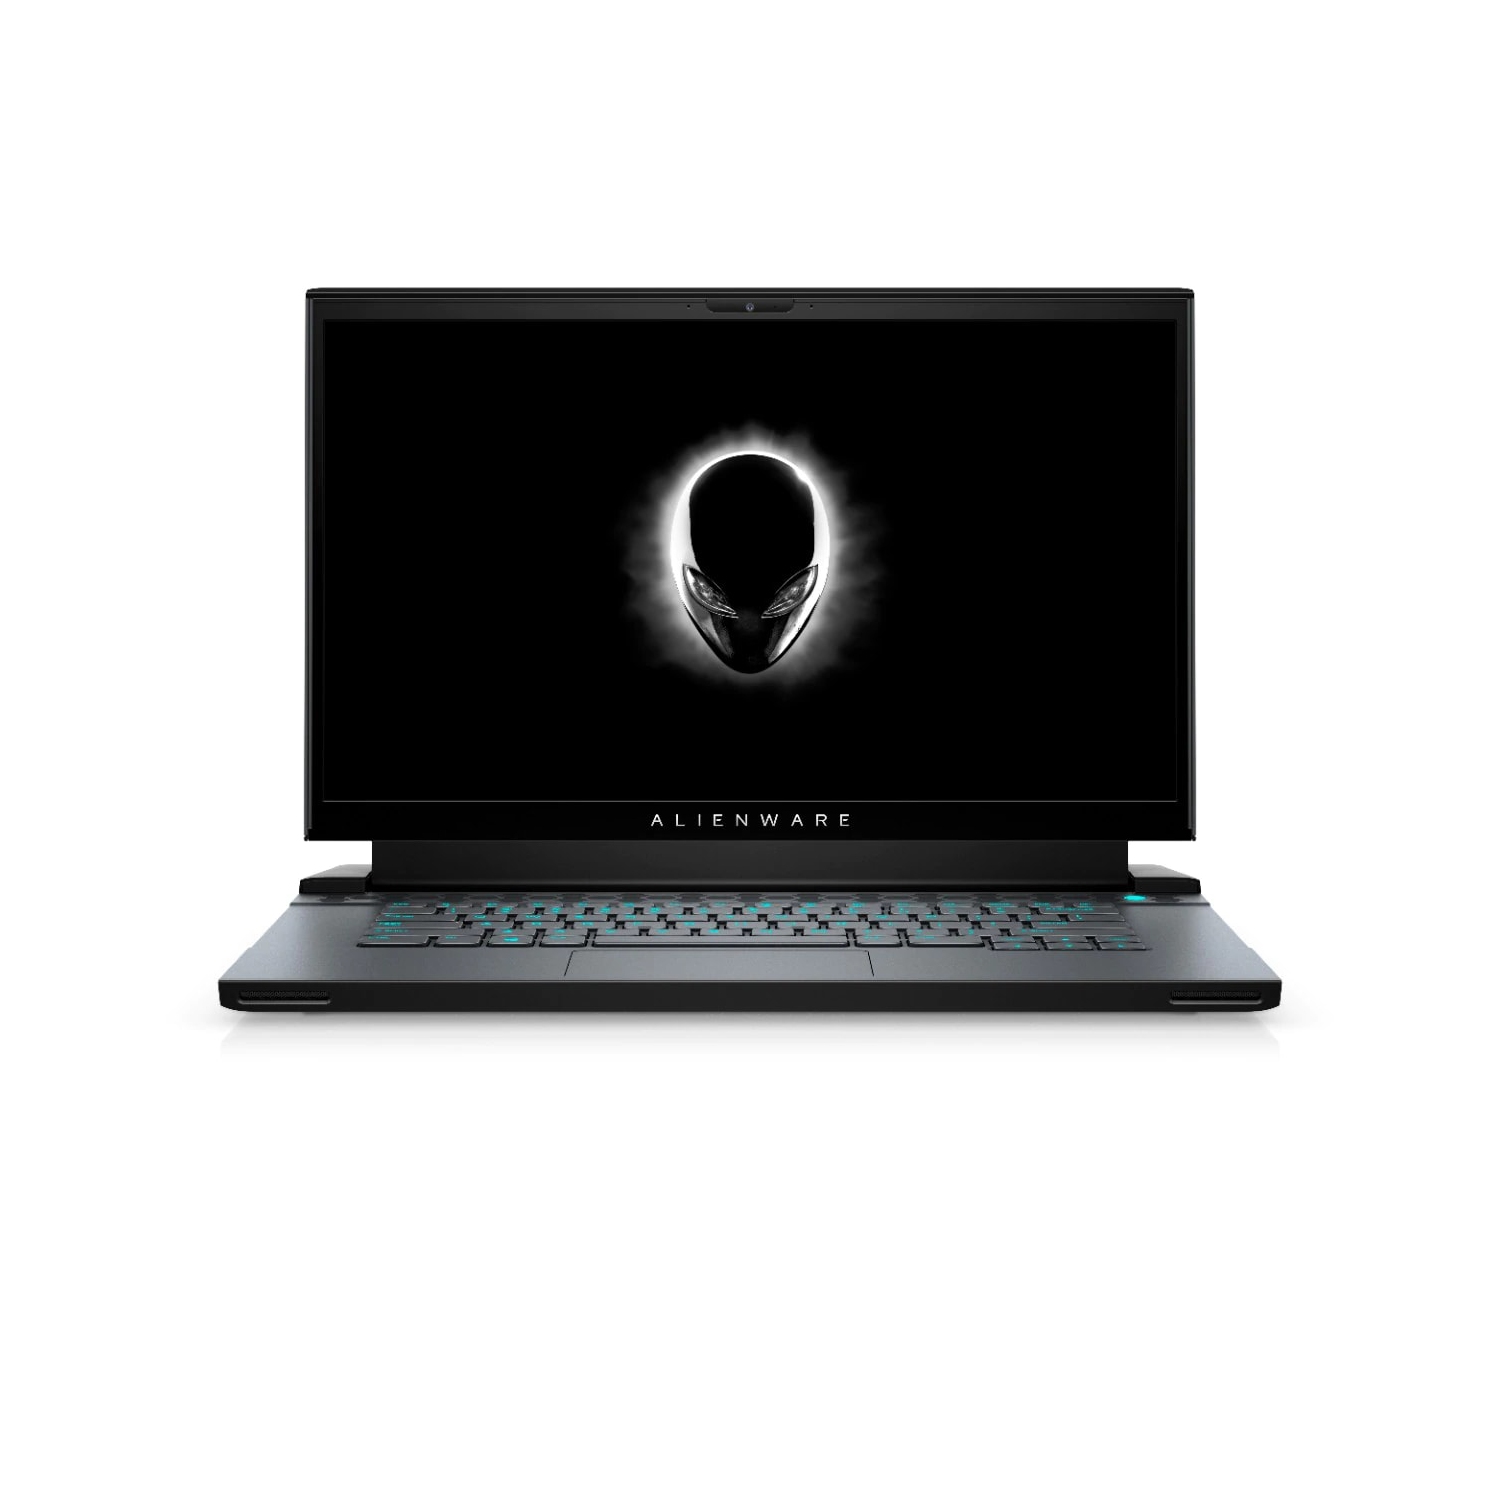 Refurbished (Excellent) - Dell Alienware m15 R4 Gaming Laptop (2021), 15.6" FHD, Core i7, 512GB SSD + 512GB SSD, 32GB RAM, RTX 3080, 5 GHz, 10th Gen CPU Certified